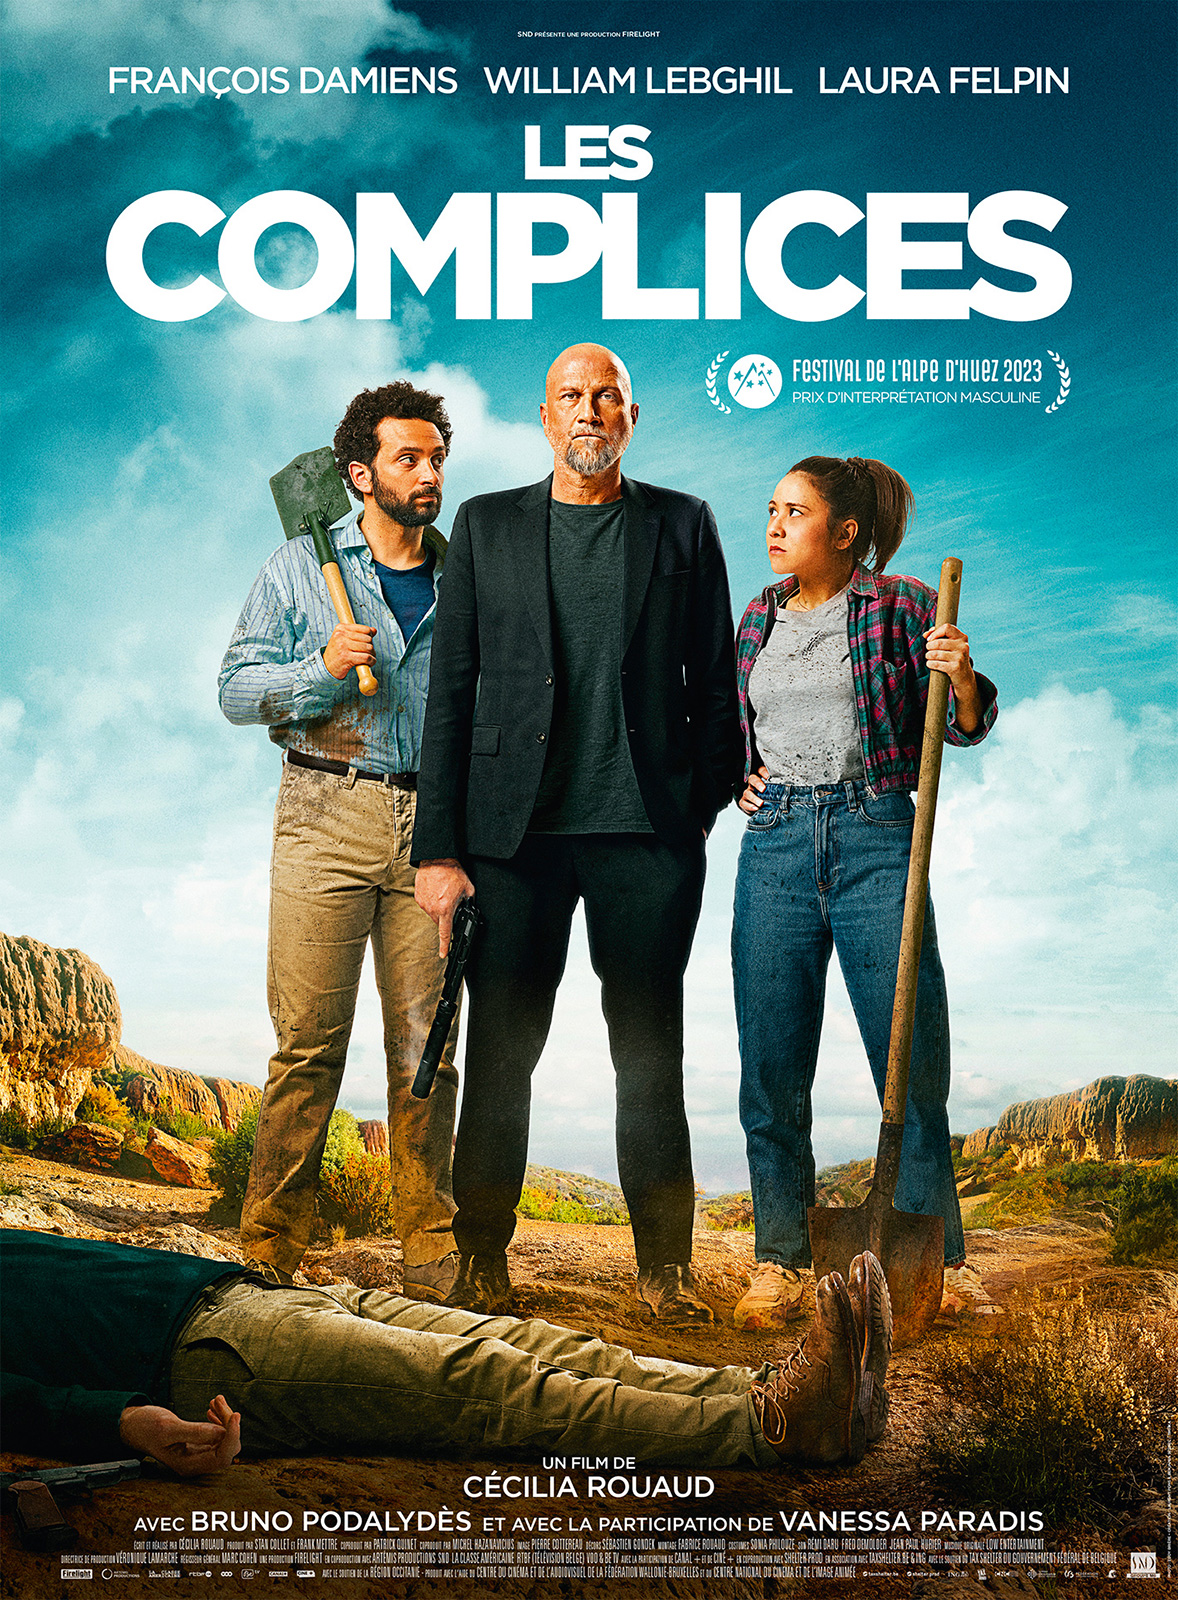 Les Complices - film 2023 streaming VF gratuit complet